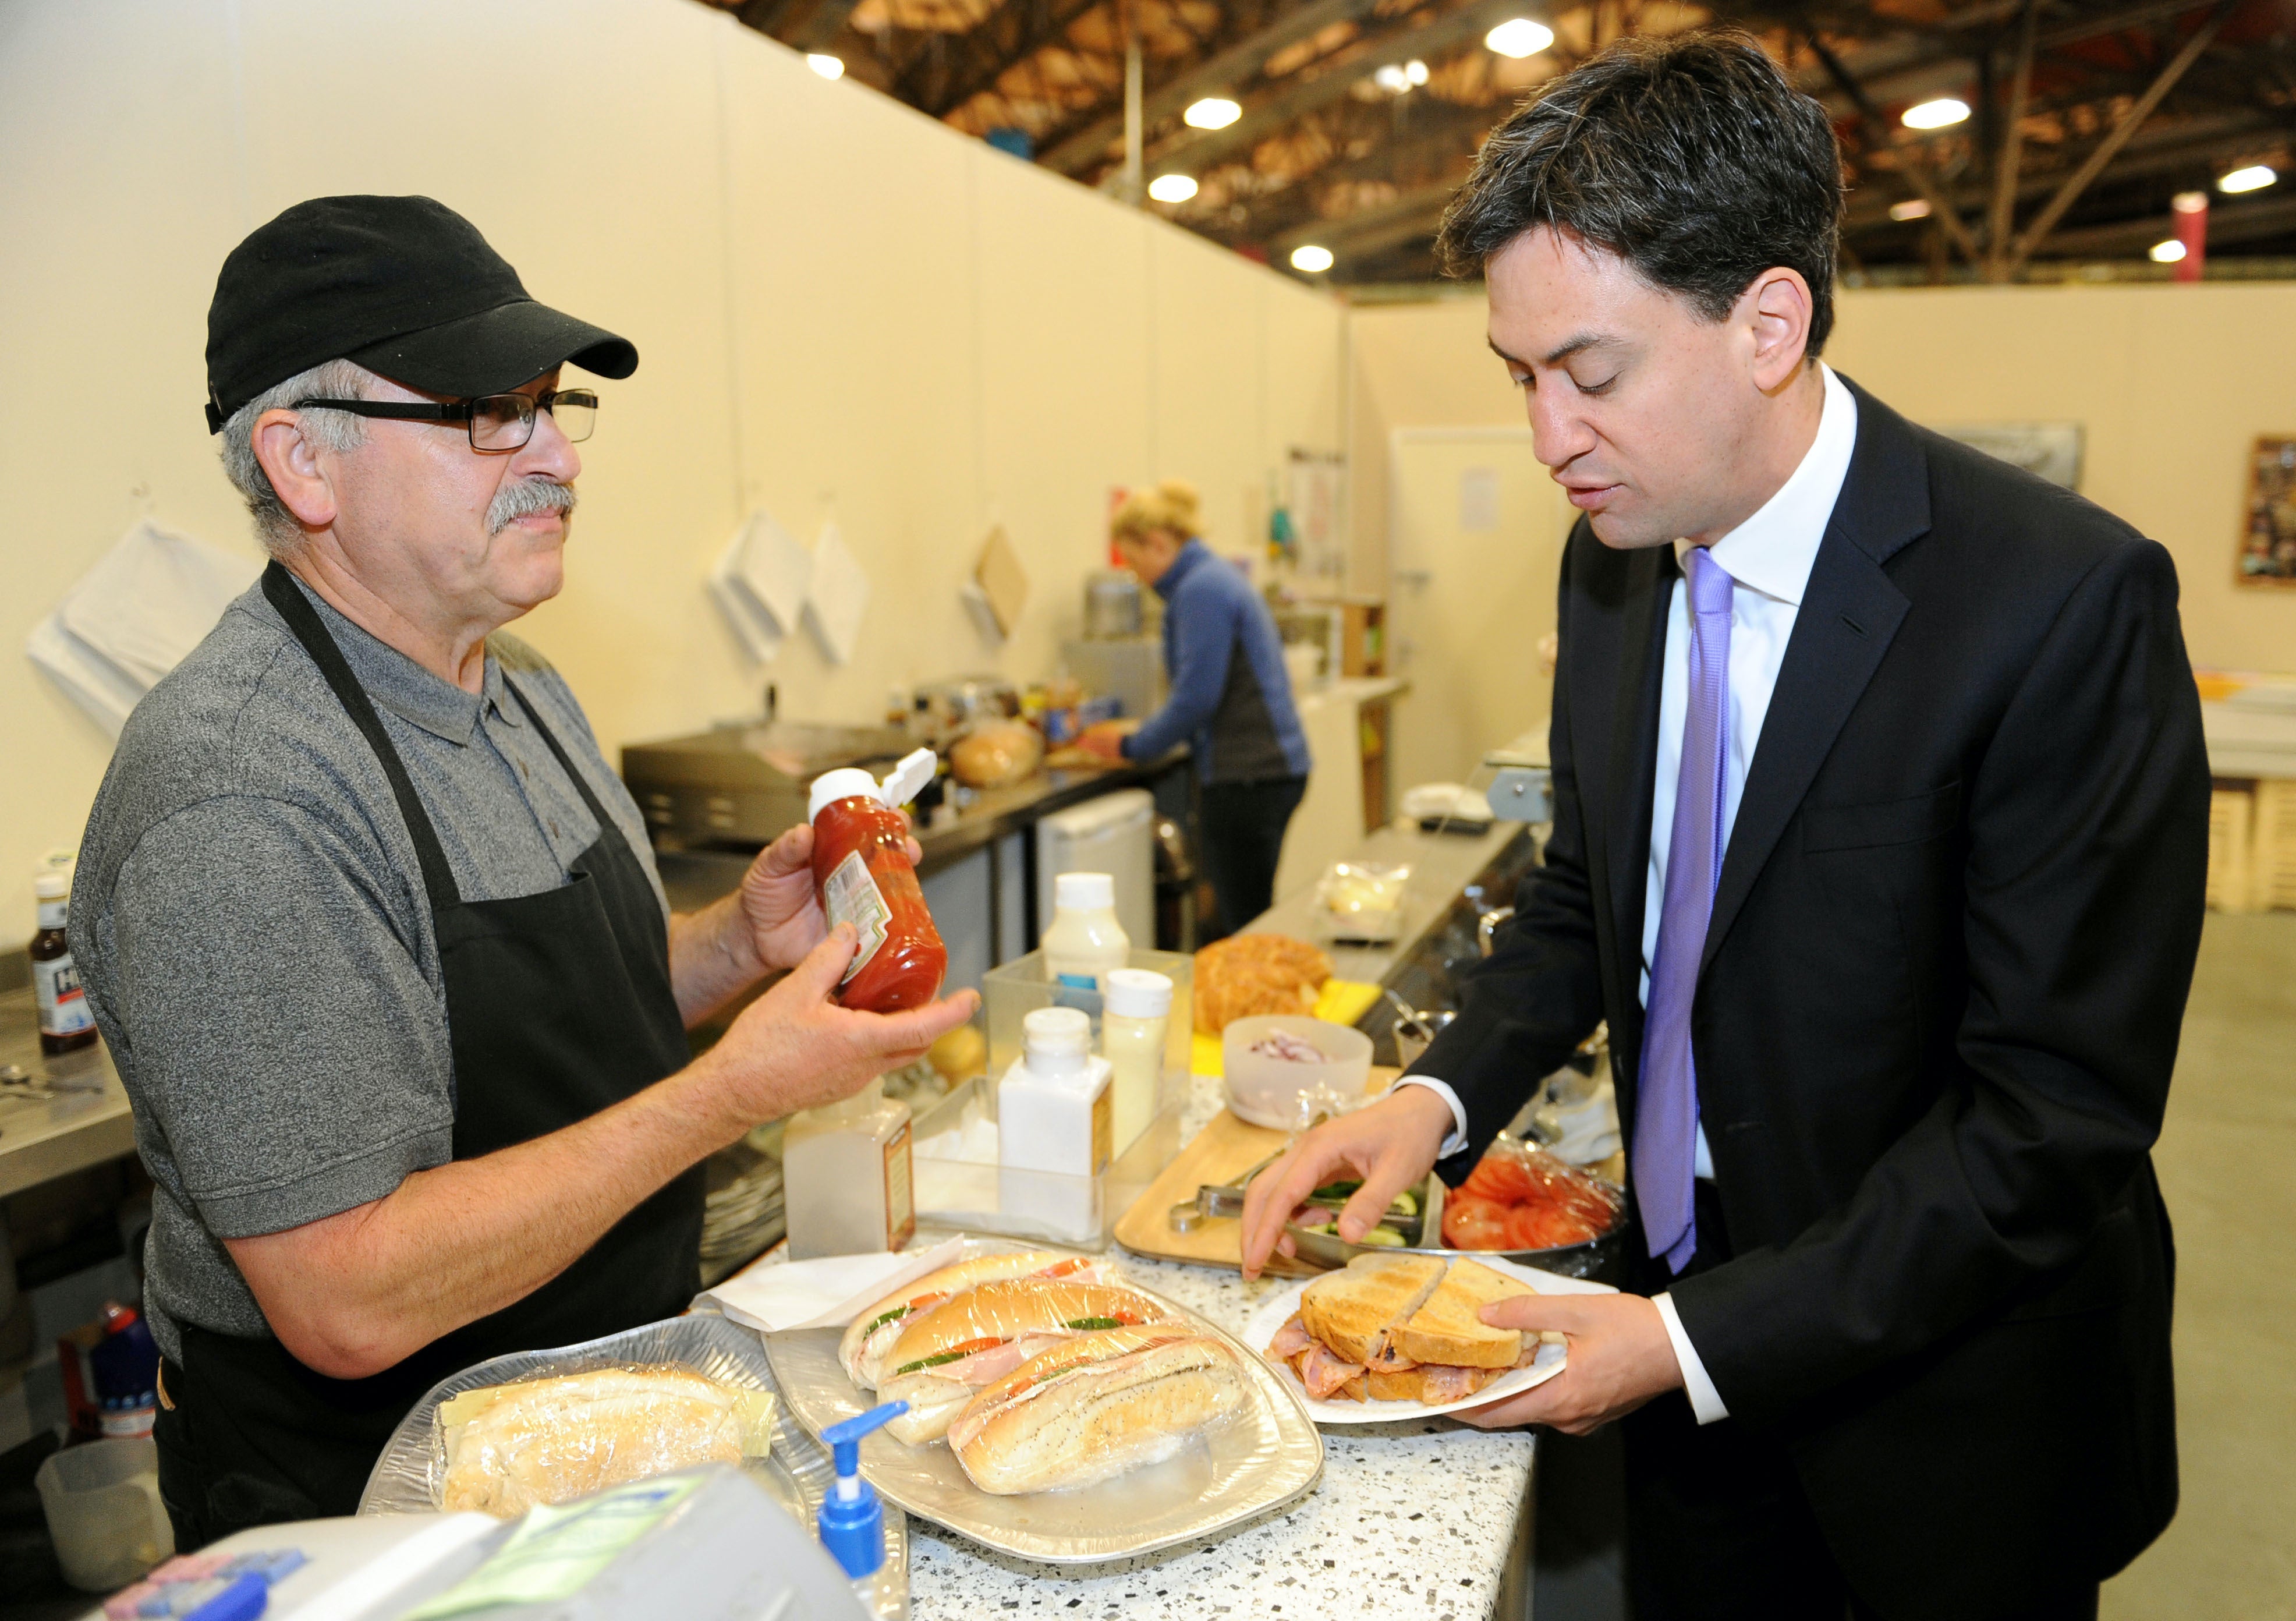 Ed Miliband prepares to eat a bacon sandwich